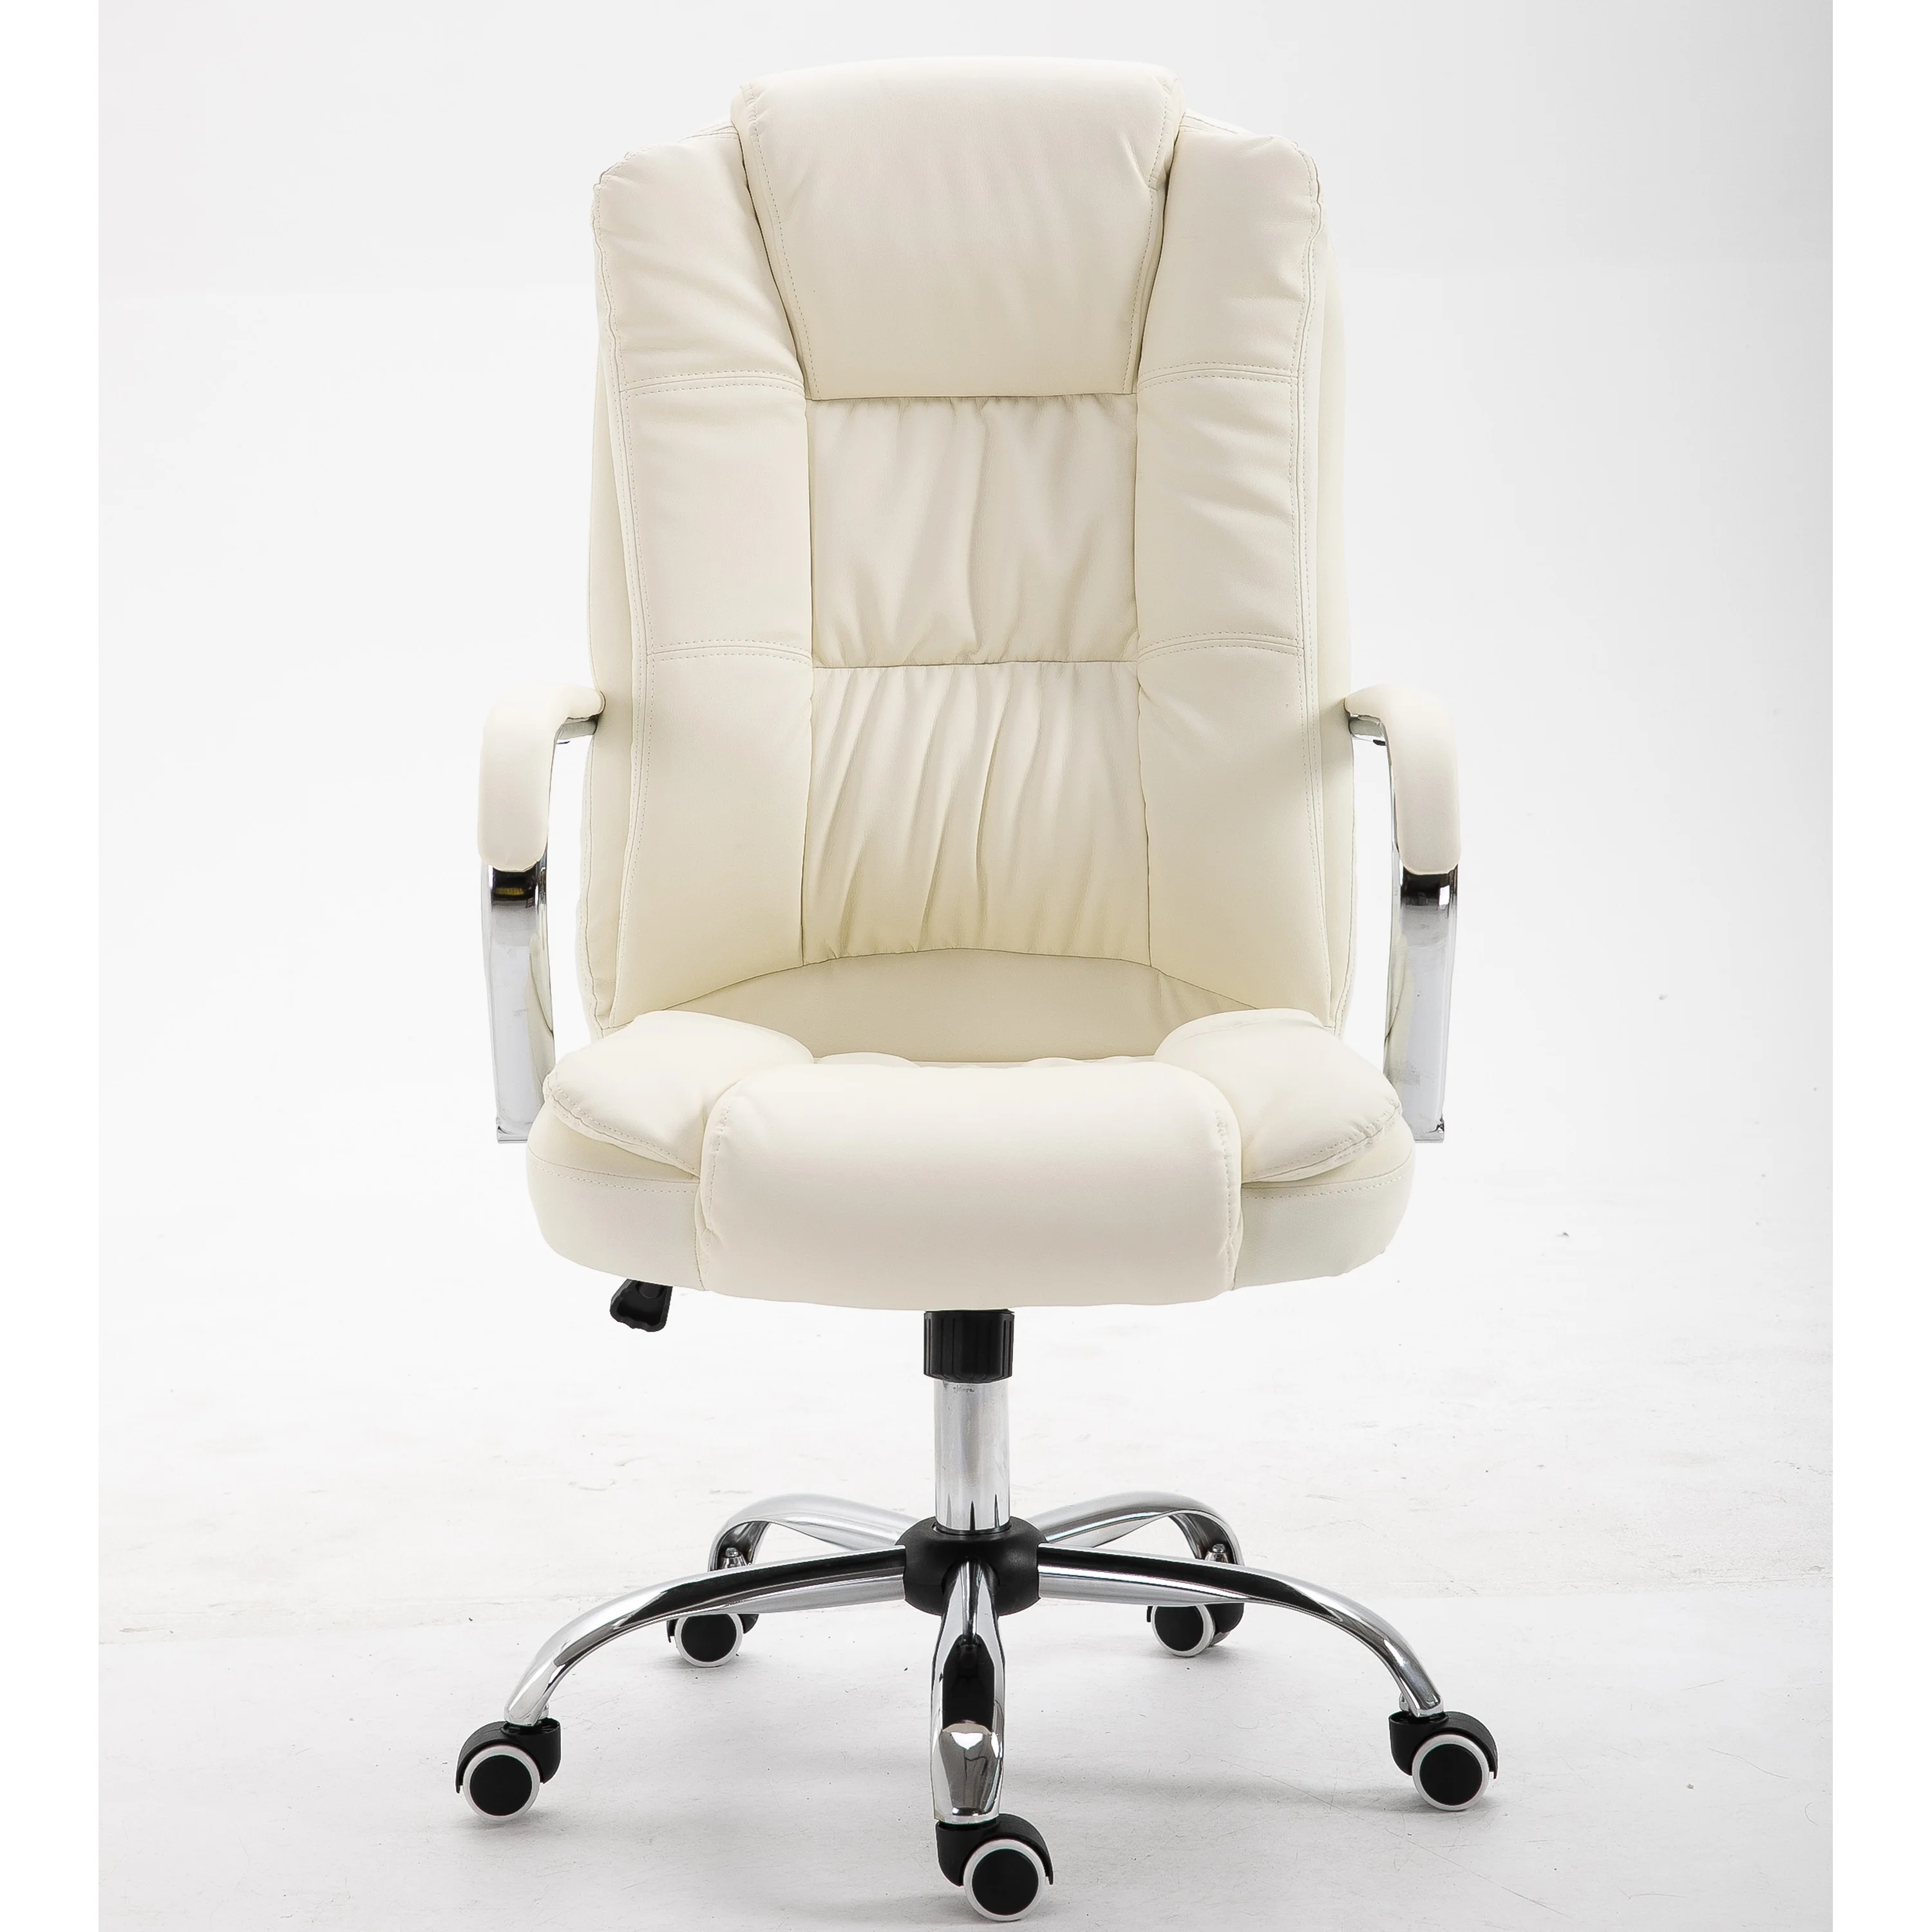 High Quality Office Chair White Chairs For Office - Buy Chairs For  Office,White Chairs For Office,High Quality Office Chair Product on Alibaba .com